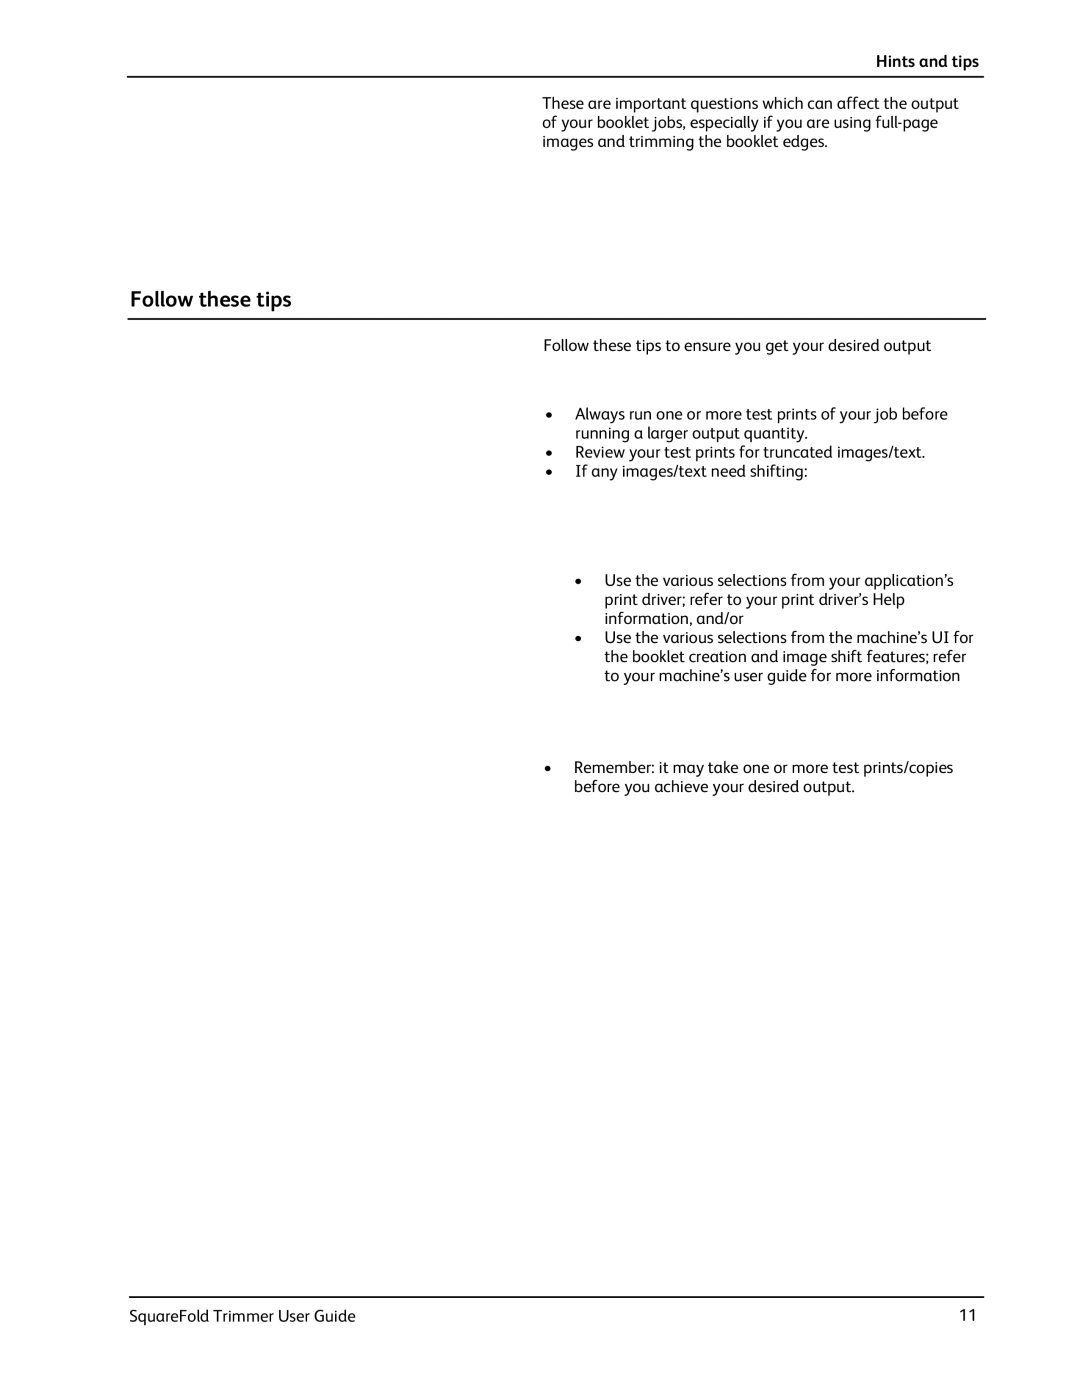 Xerox SquareFold manual Hints and tips, Follow these tips 